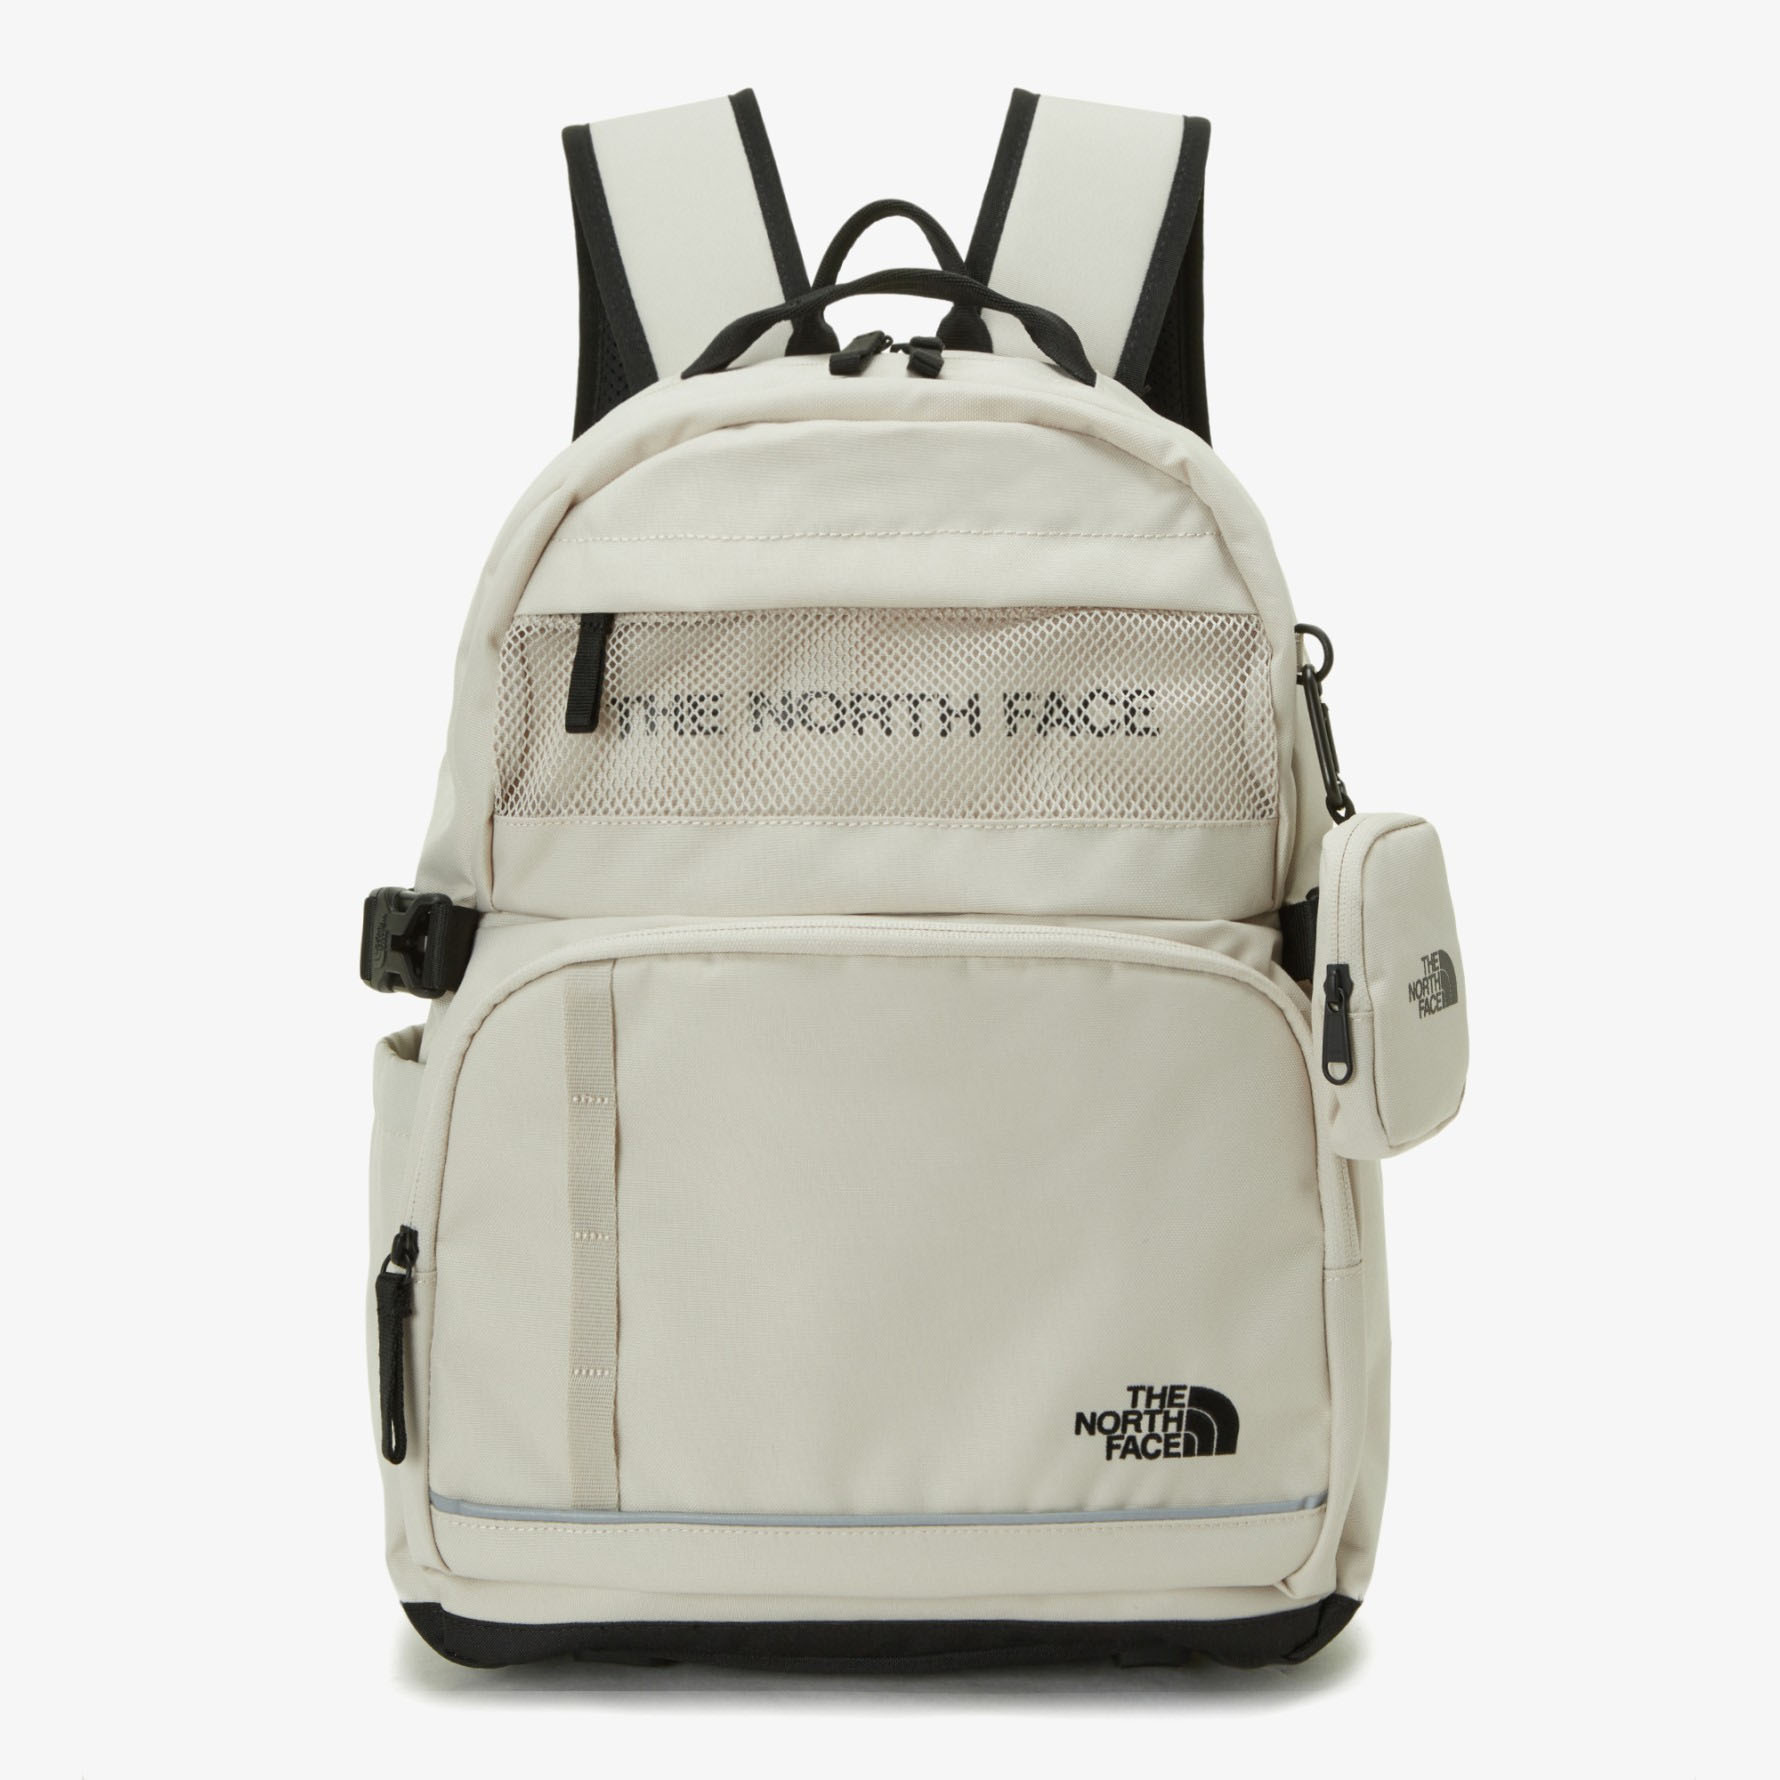 THE NORTH FACE キッズ ノースフェイス リュックサック Jr. SCHOOL PACK スクールバッグ 18リットル バックパック リュック CREAM BLACK キッズ用 NM2DP50S/R｜snkrs-aclo｜02